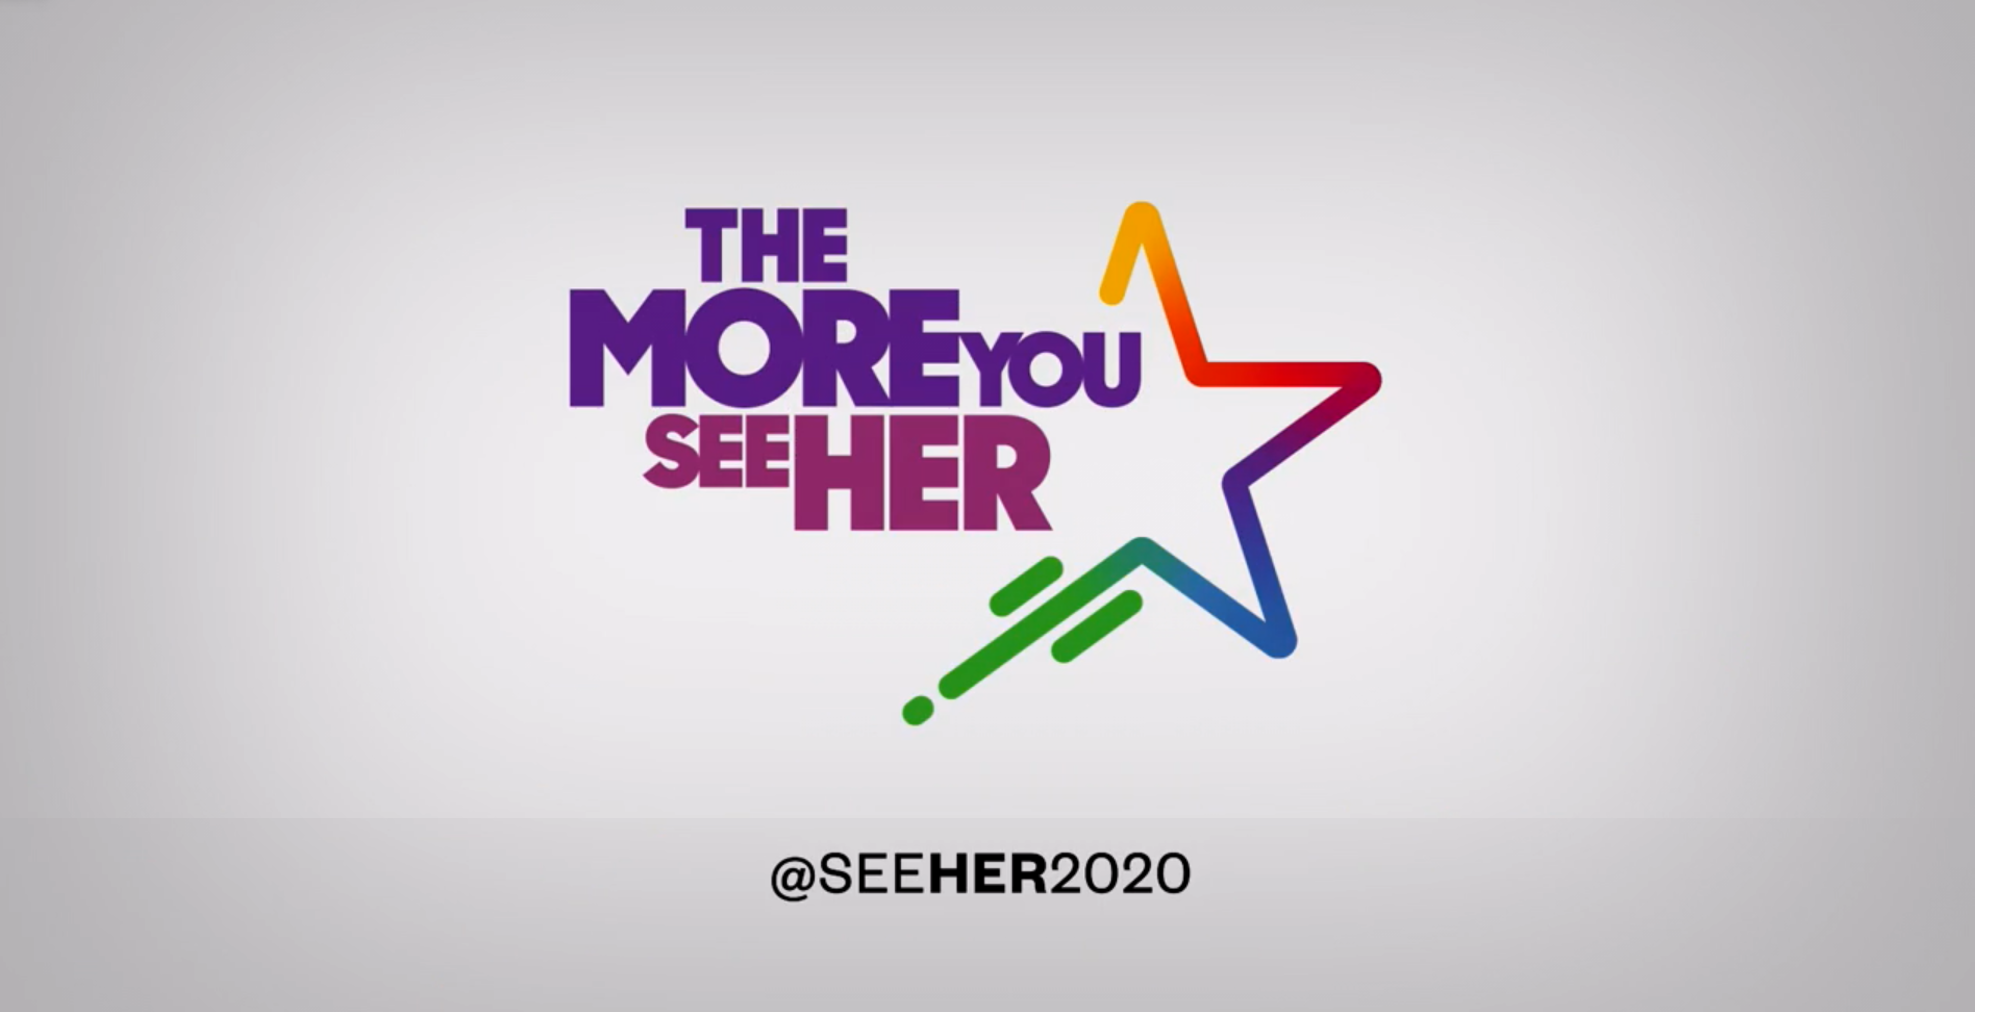 The More You SeeHer